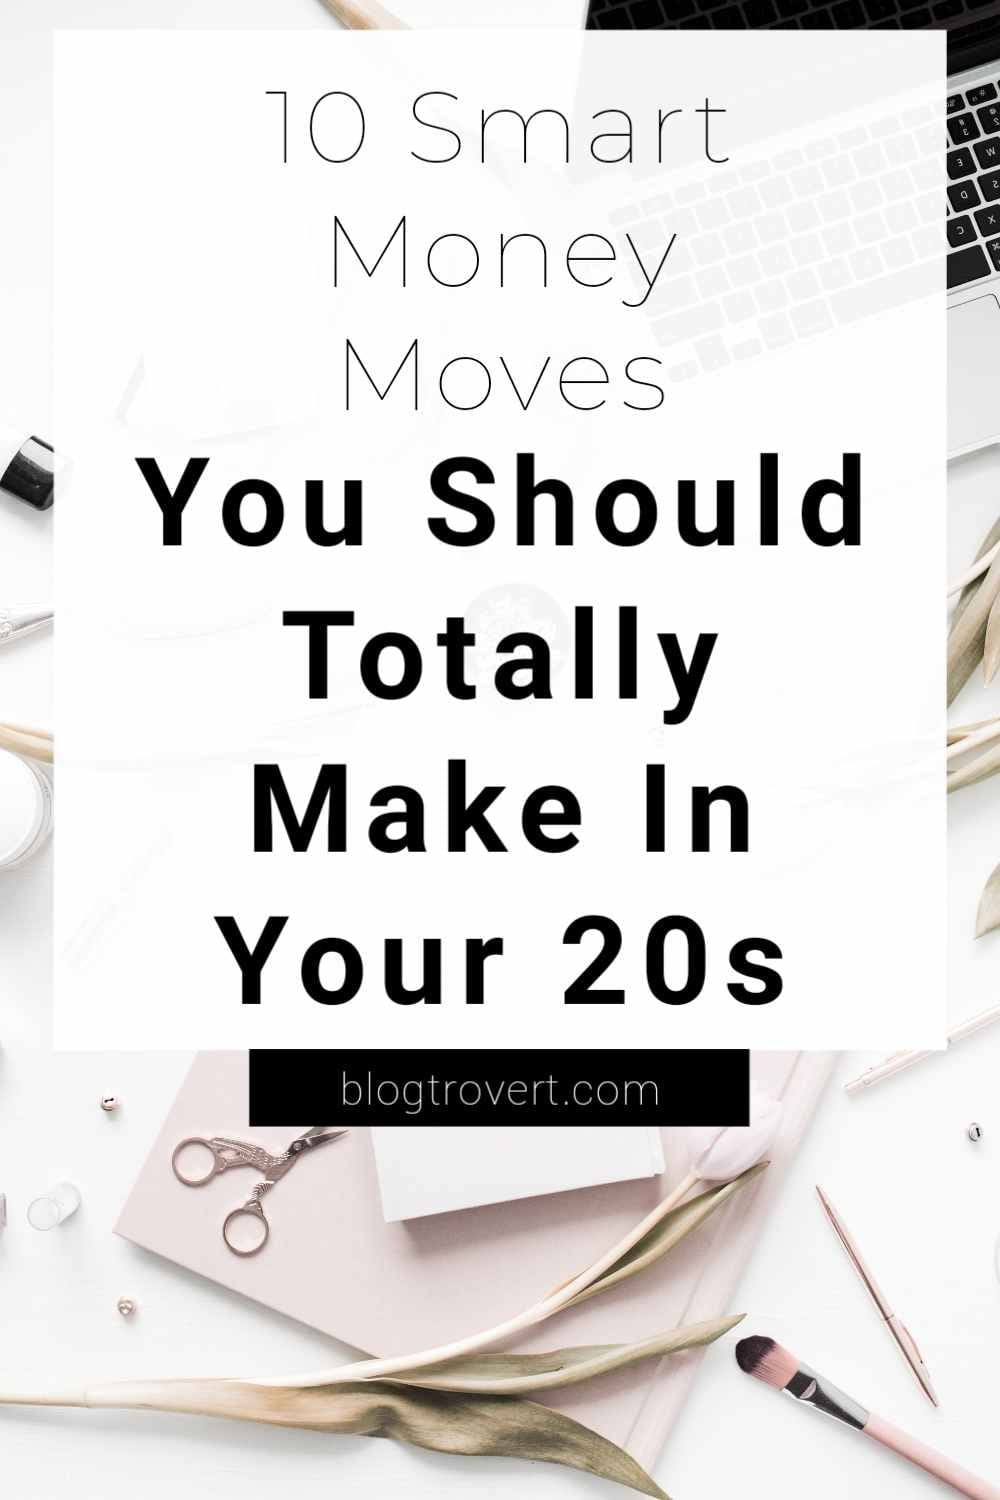 10 Smart Money Moves to Make in Your 20s for a better future 1